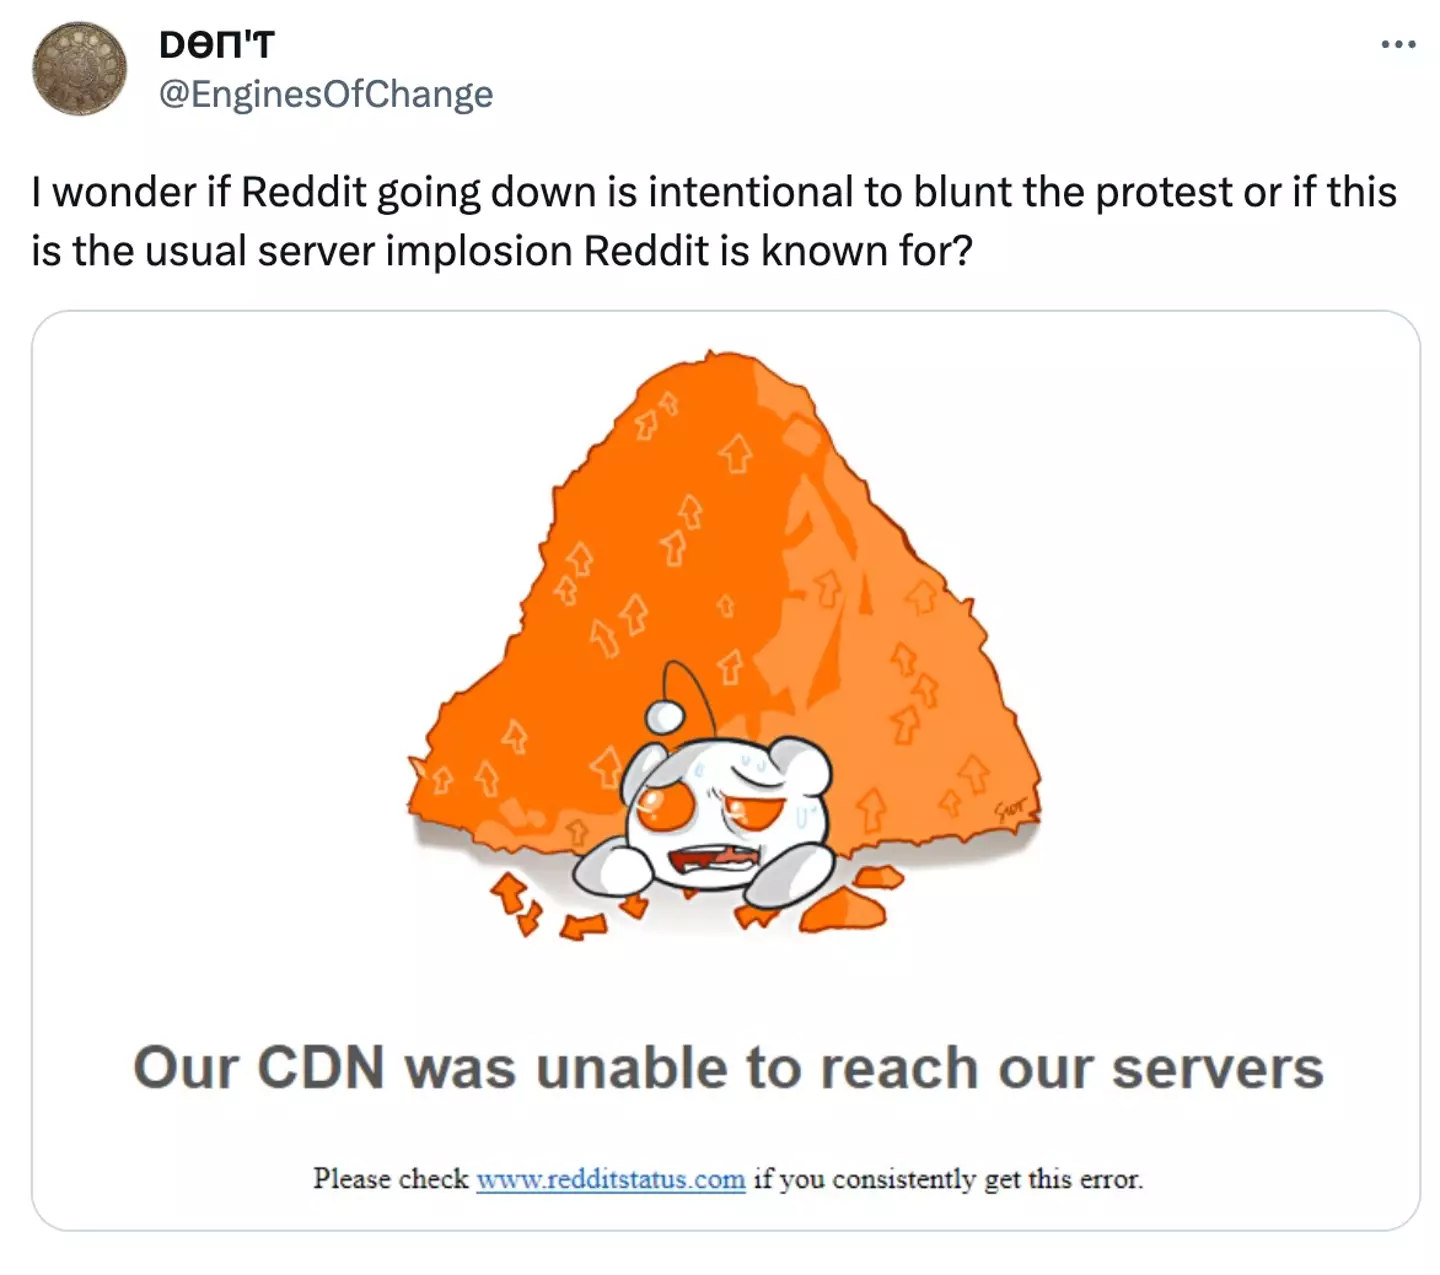 Reddit users shared screenshots of the outage.